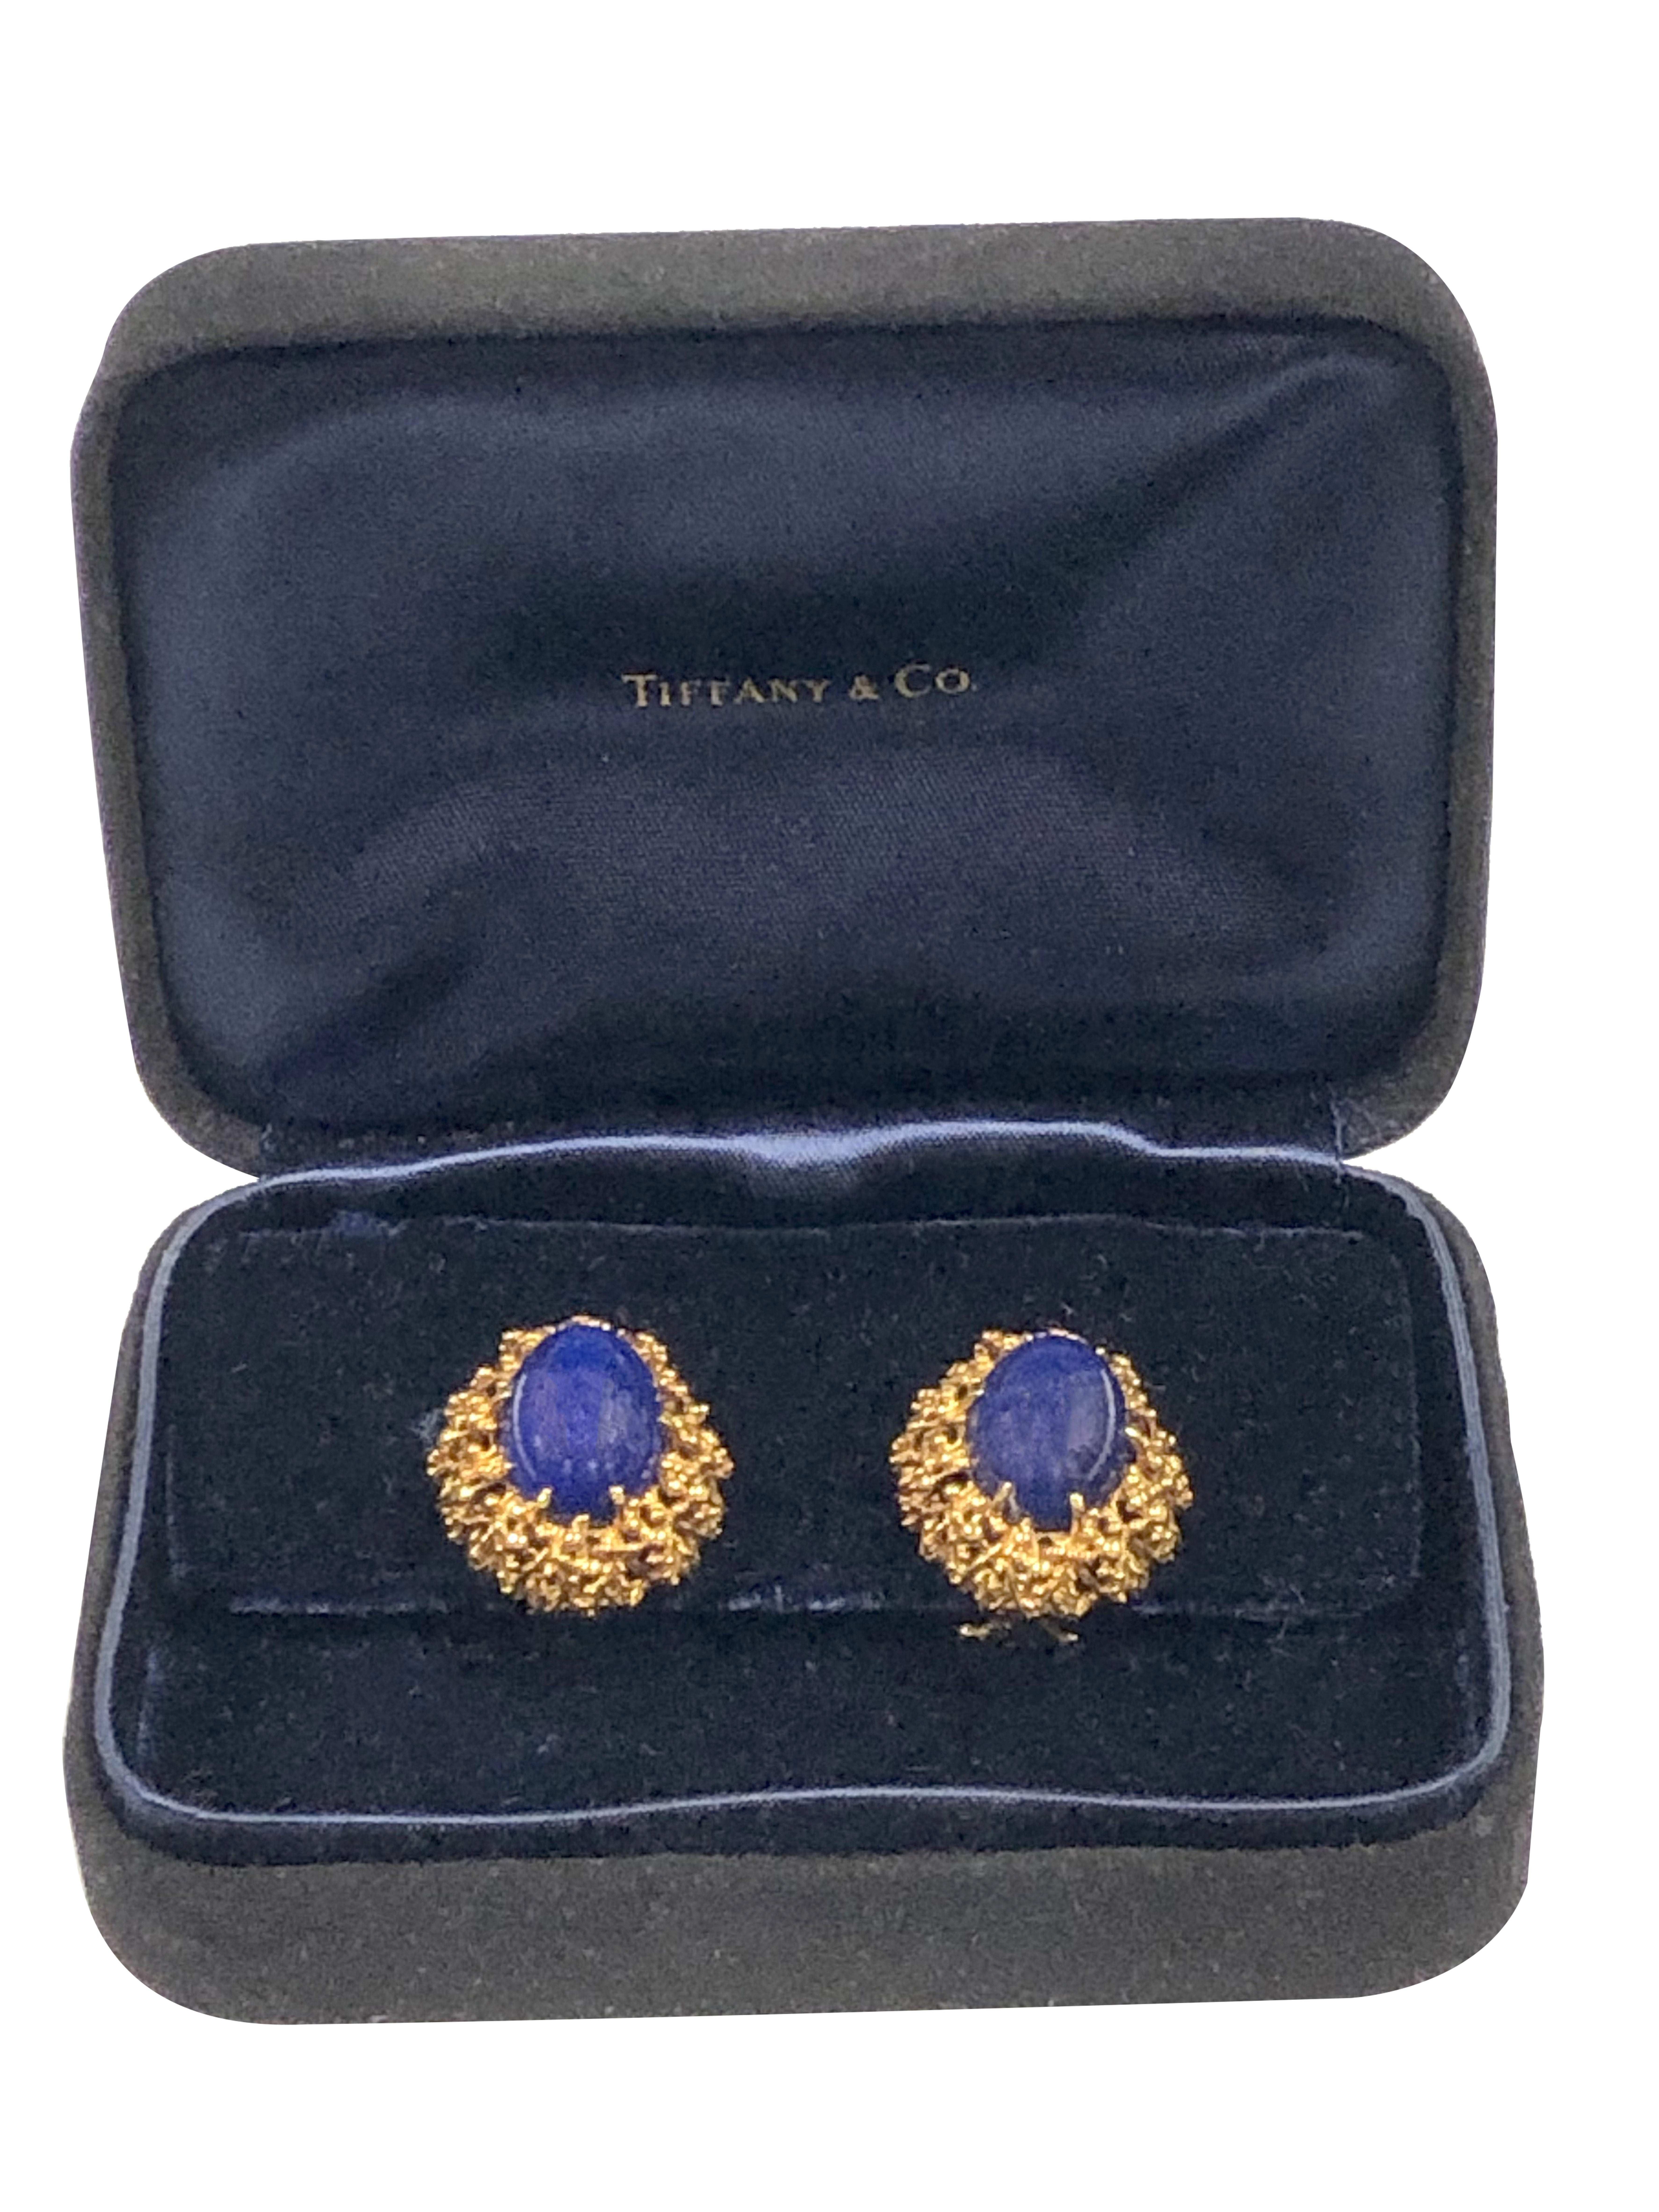 Tiffany & Co. Yellow Gold and Lapis Earrings In Excellent Condition For Sale In Chicago, IL